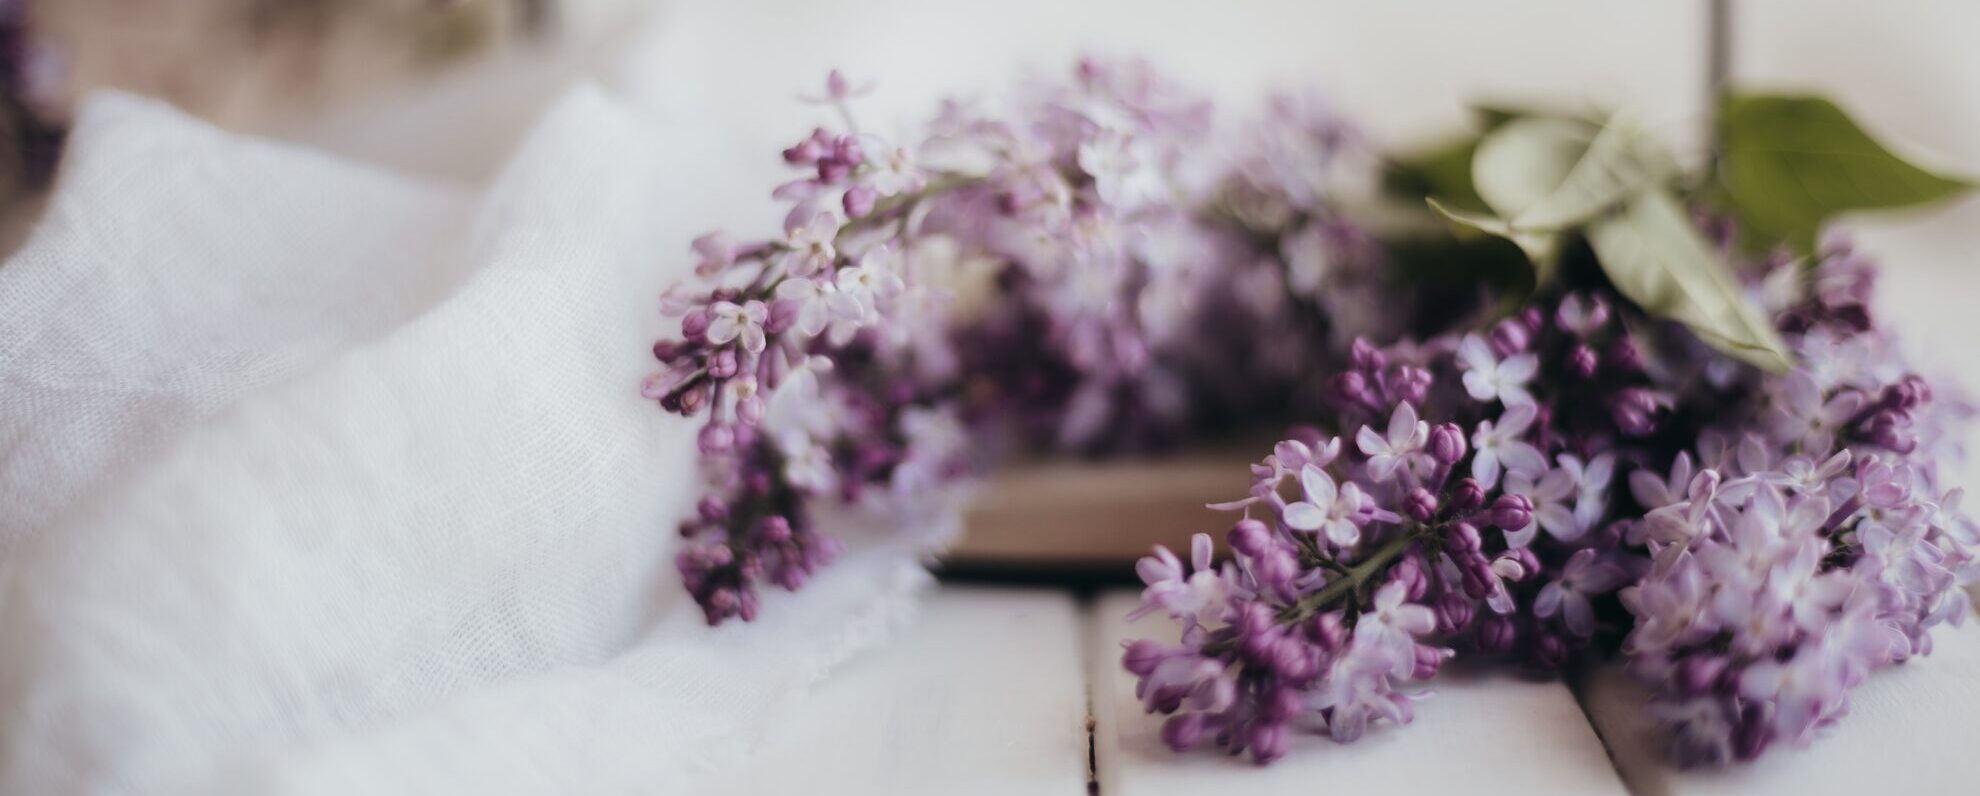 Hero image on Why Join GFG Page, depicts lilac flowers on a whitewashed wooden table